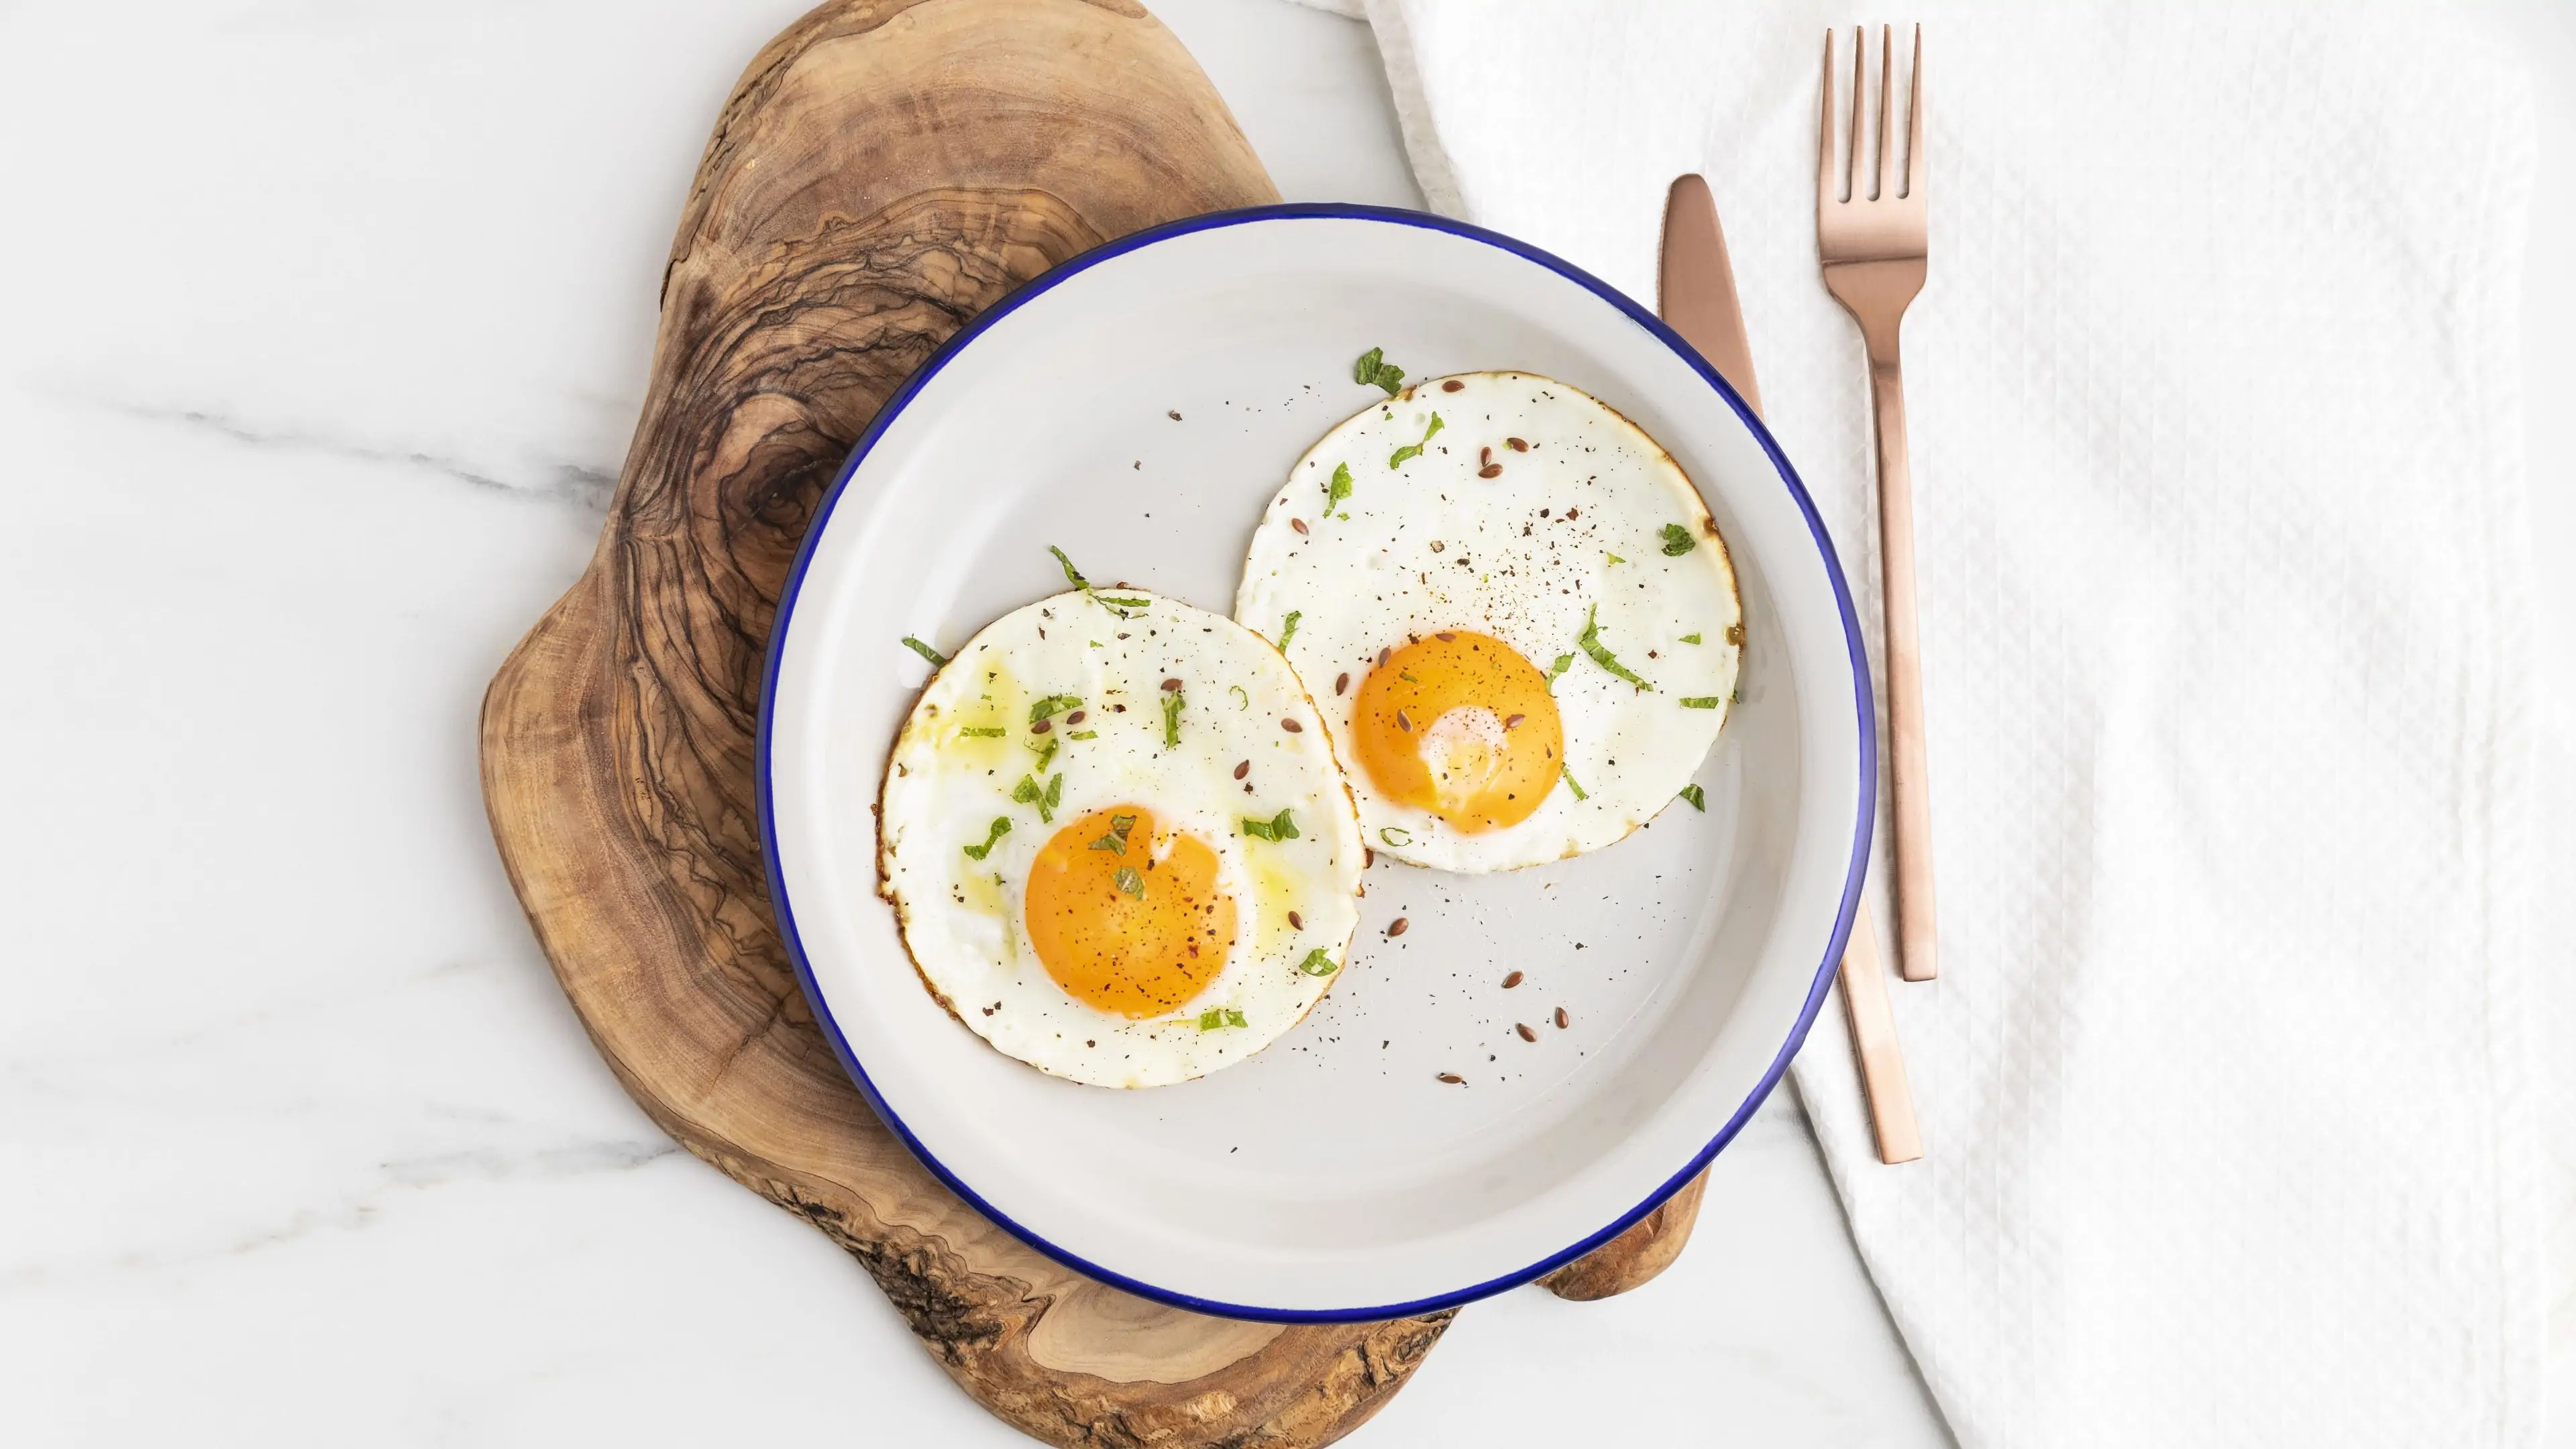 Fried eggs are on our list of one ingredient foods